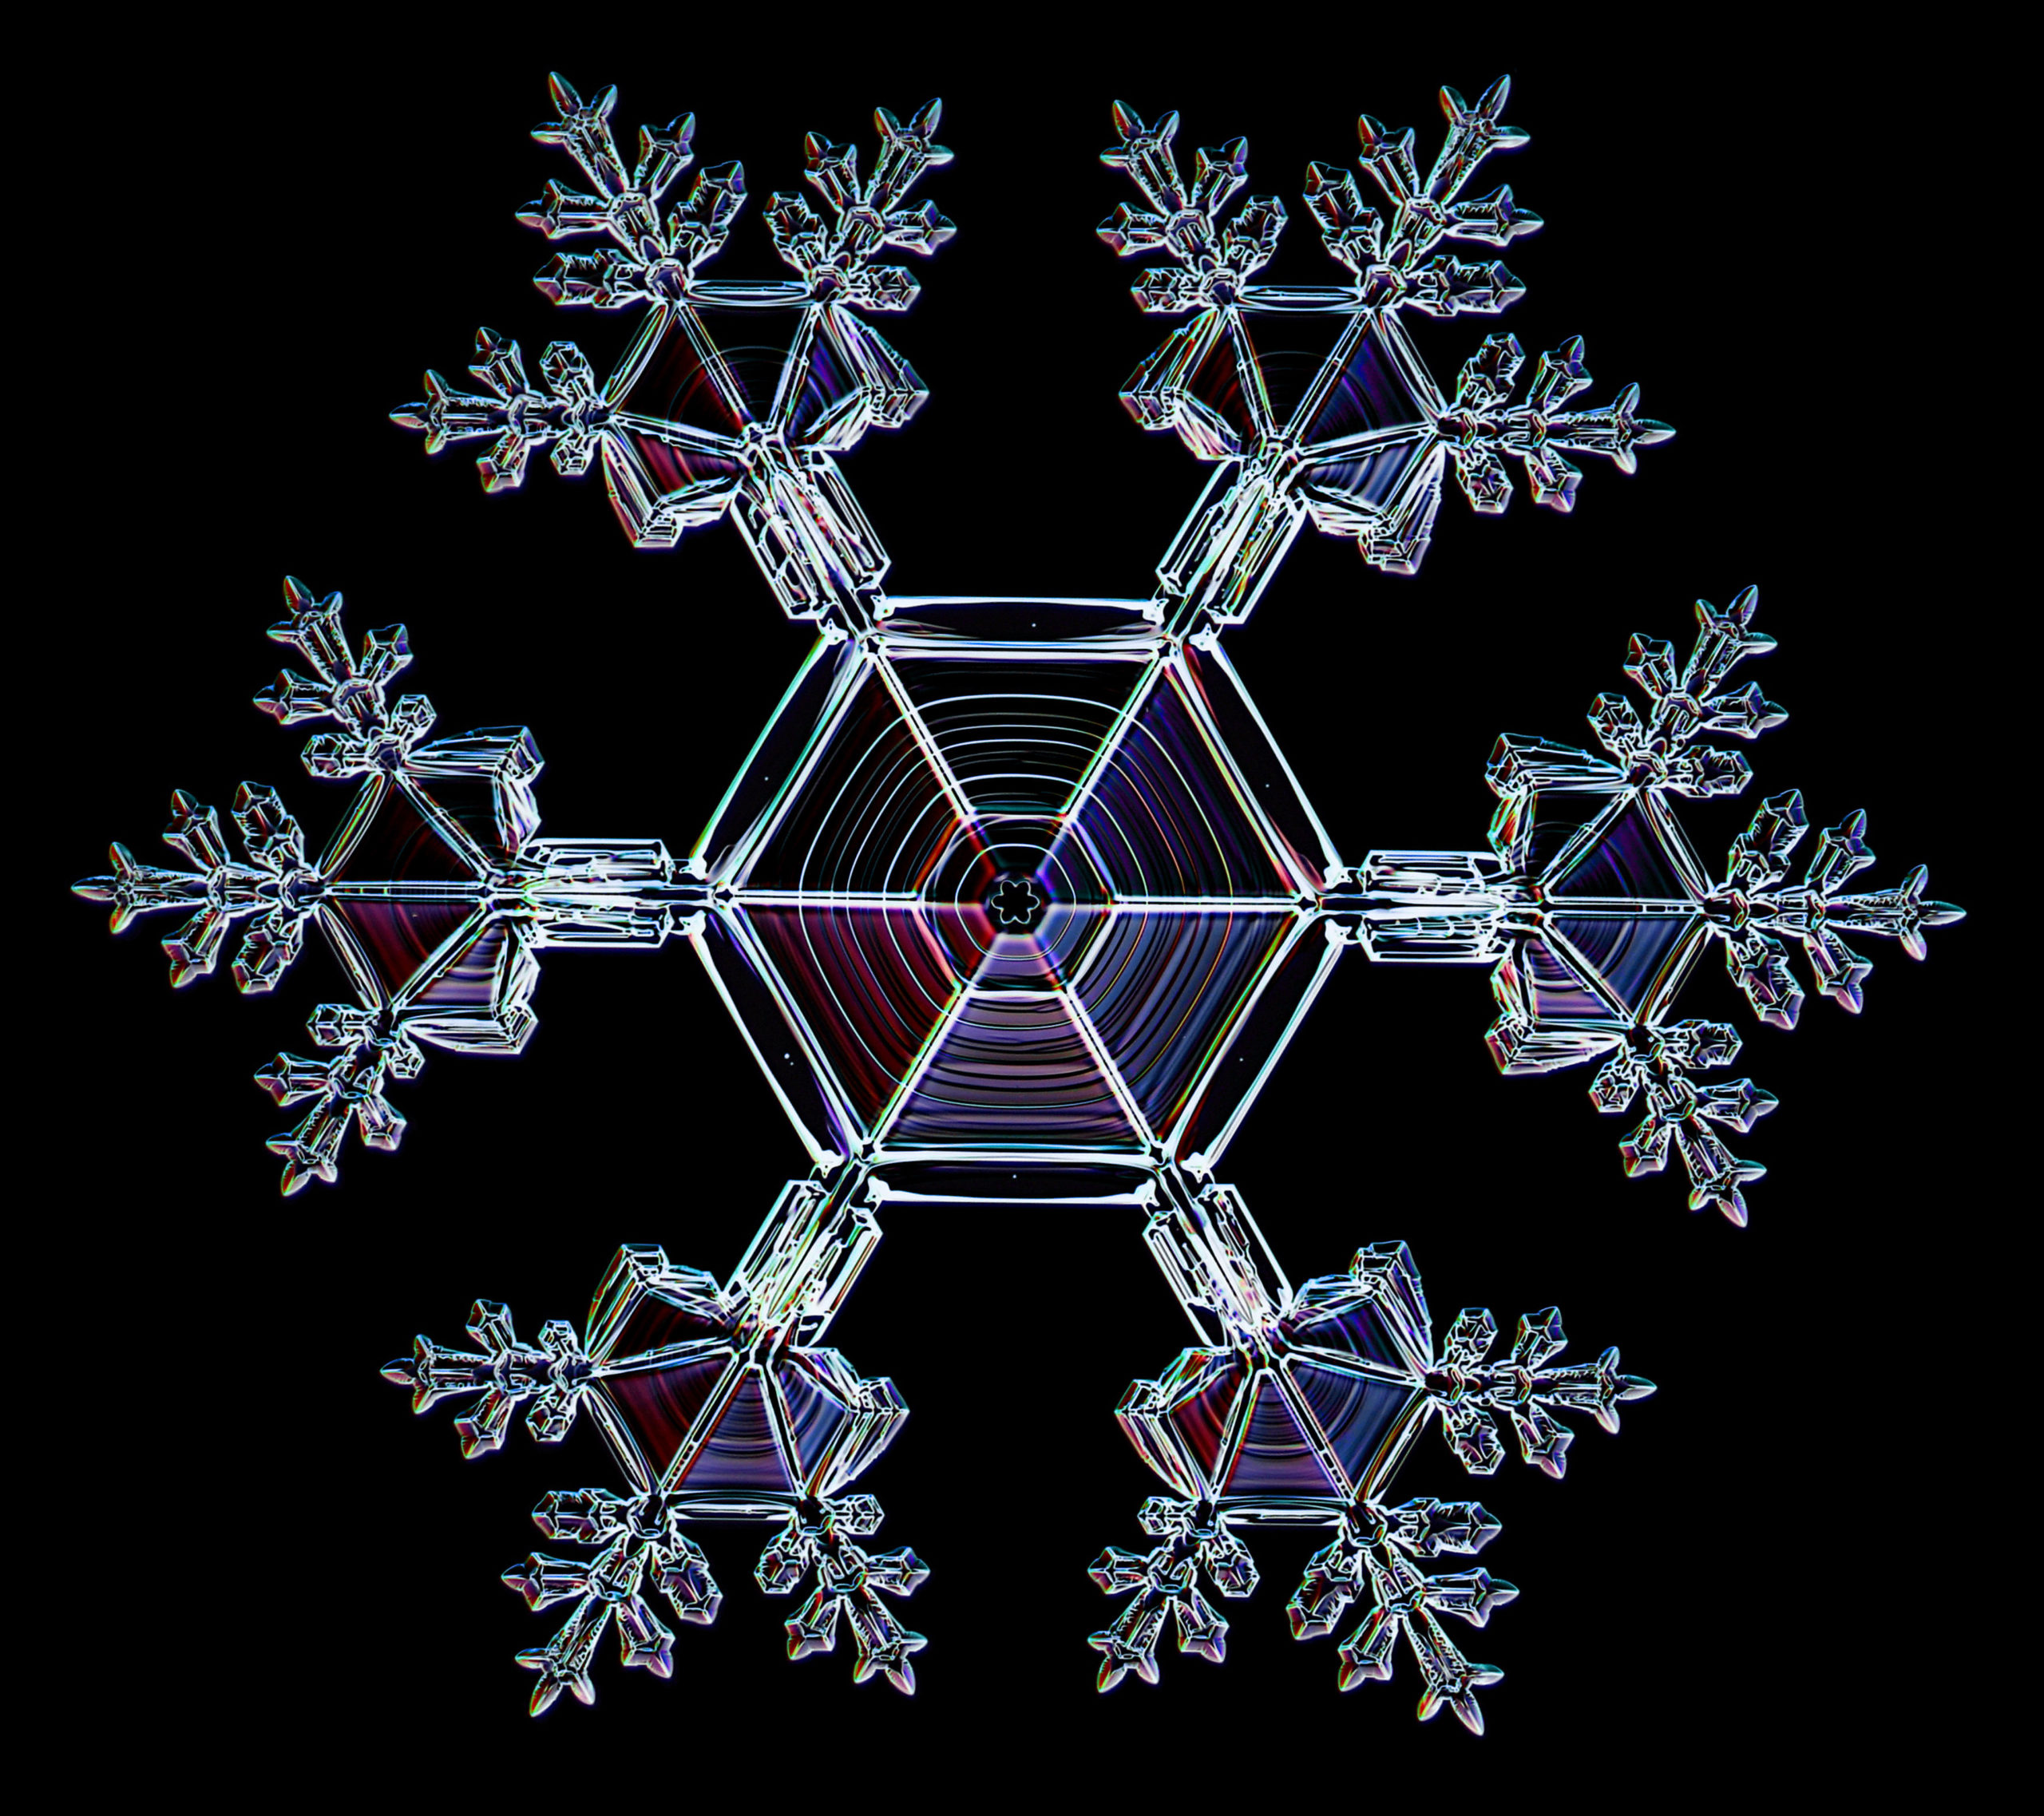 Ice Ih  The Fascination of Crystals and Symmetry